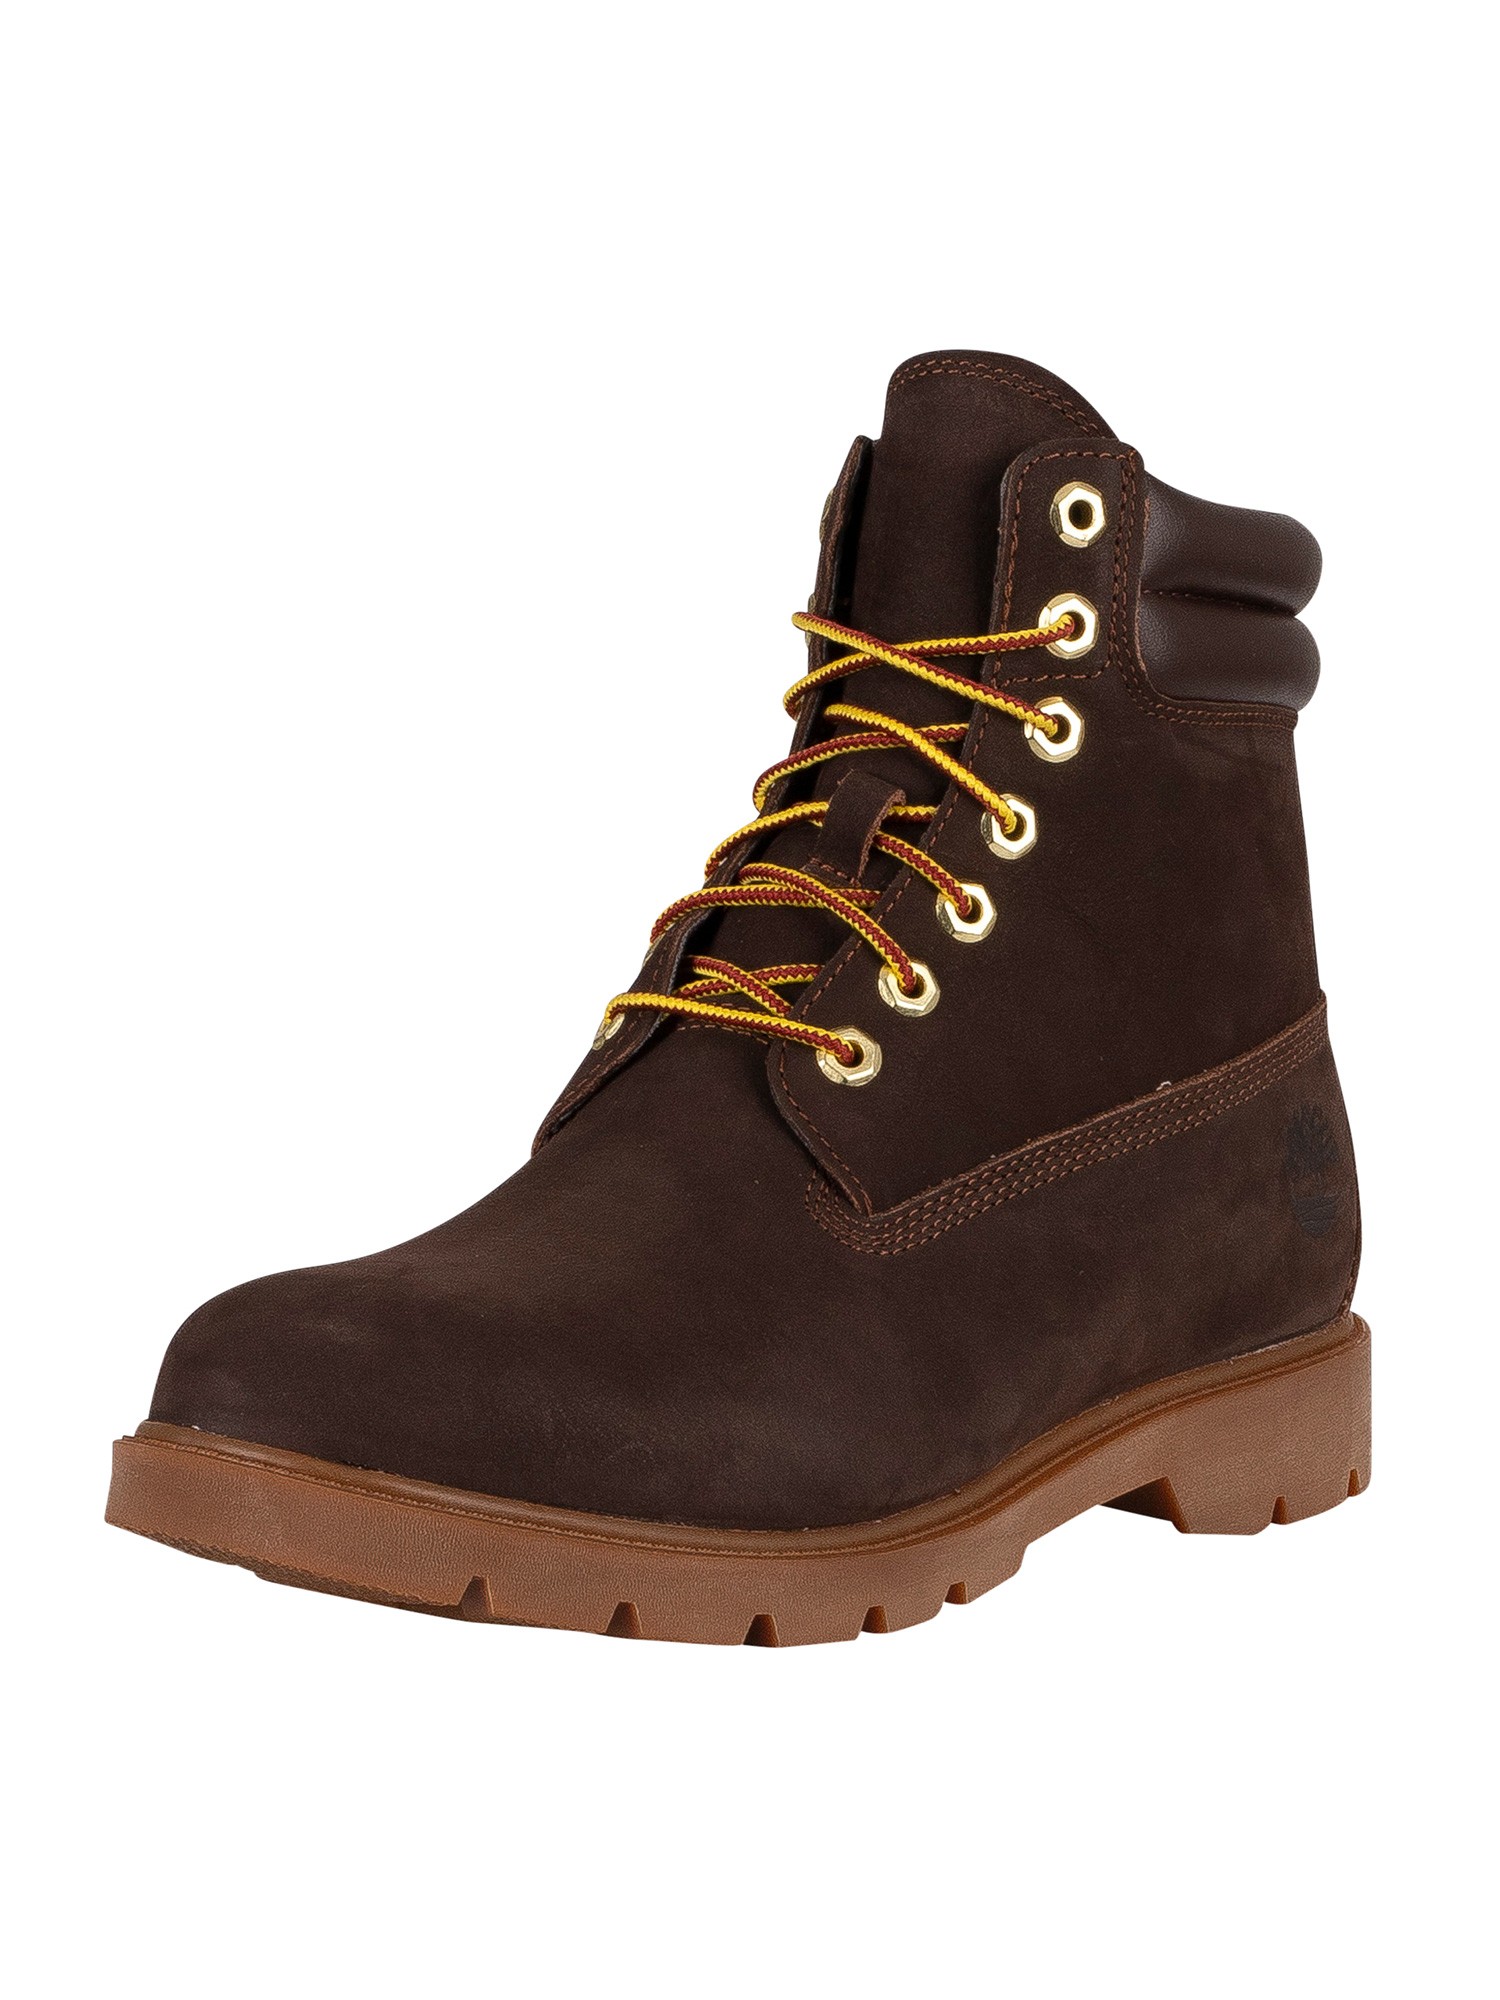 6 Inch Basic Boots product